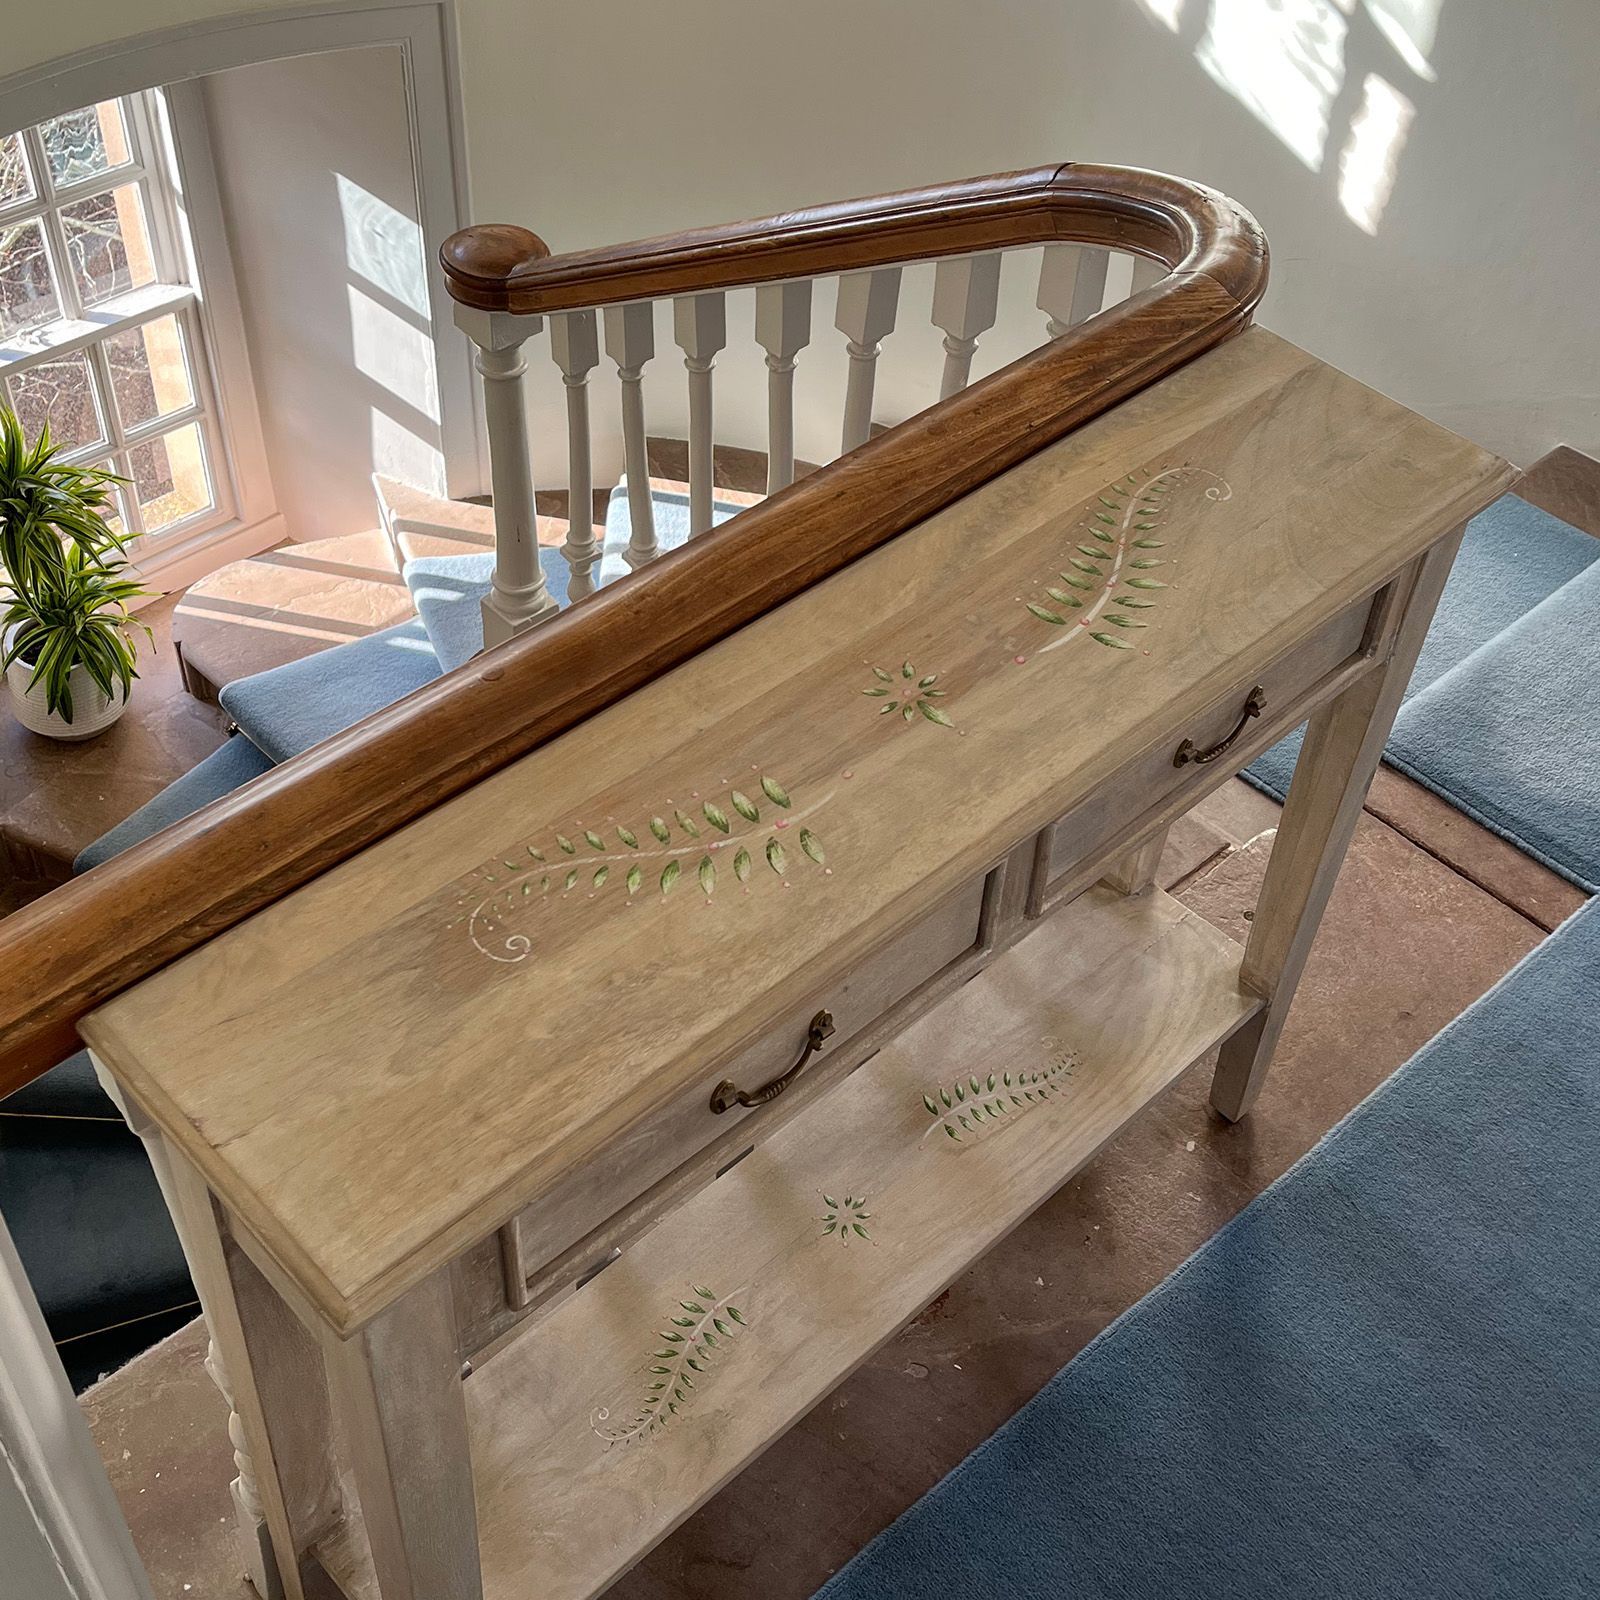 Fern console table at the top of a staircase.